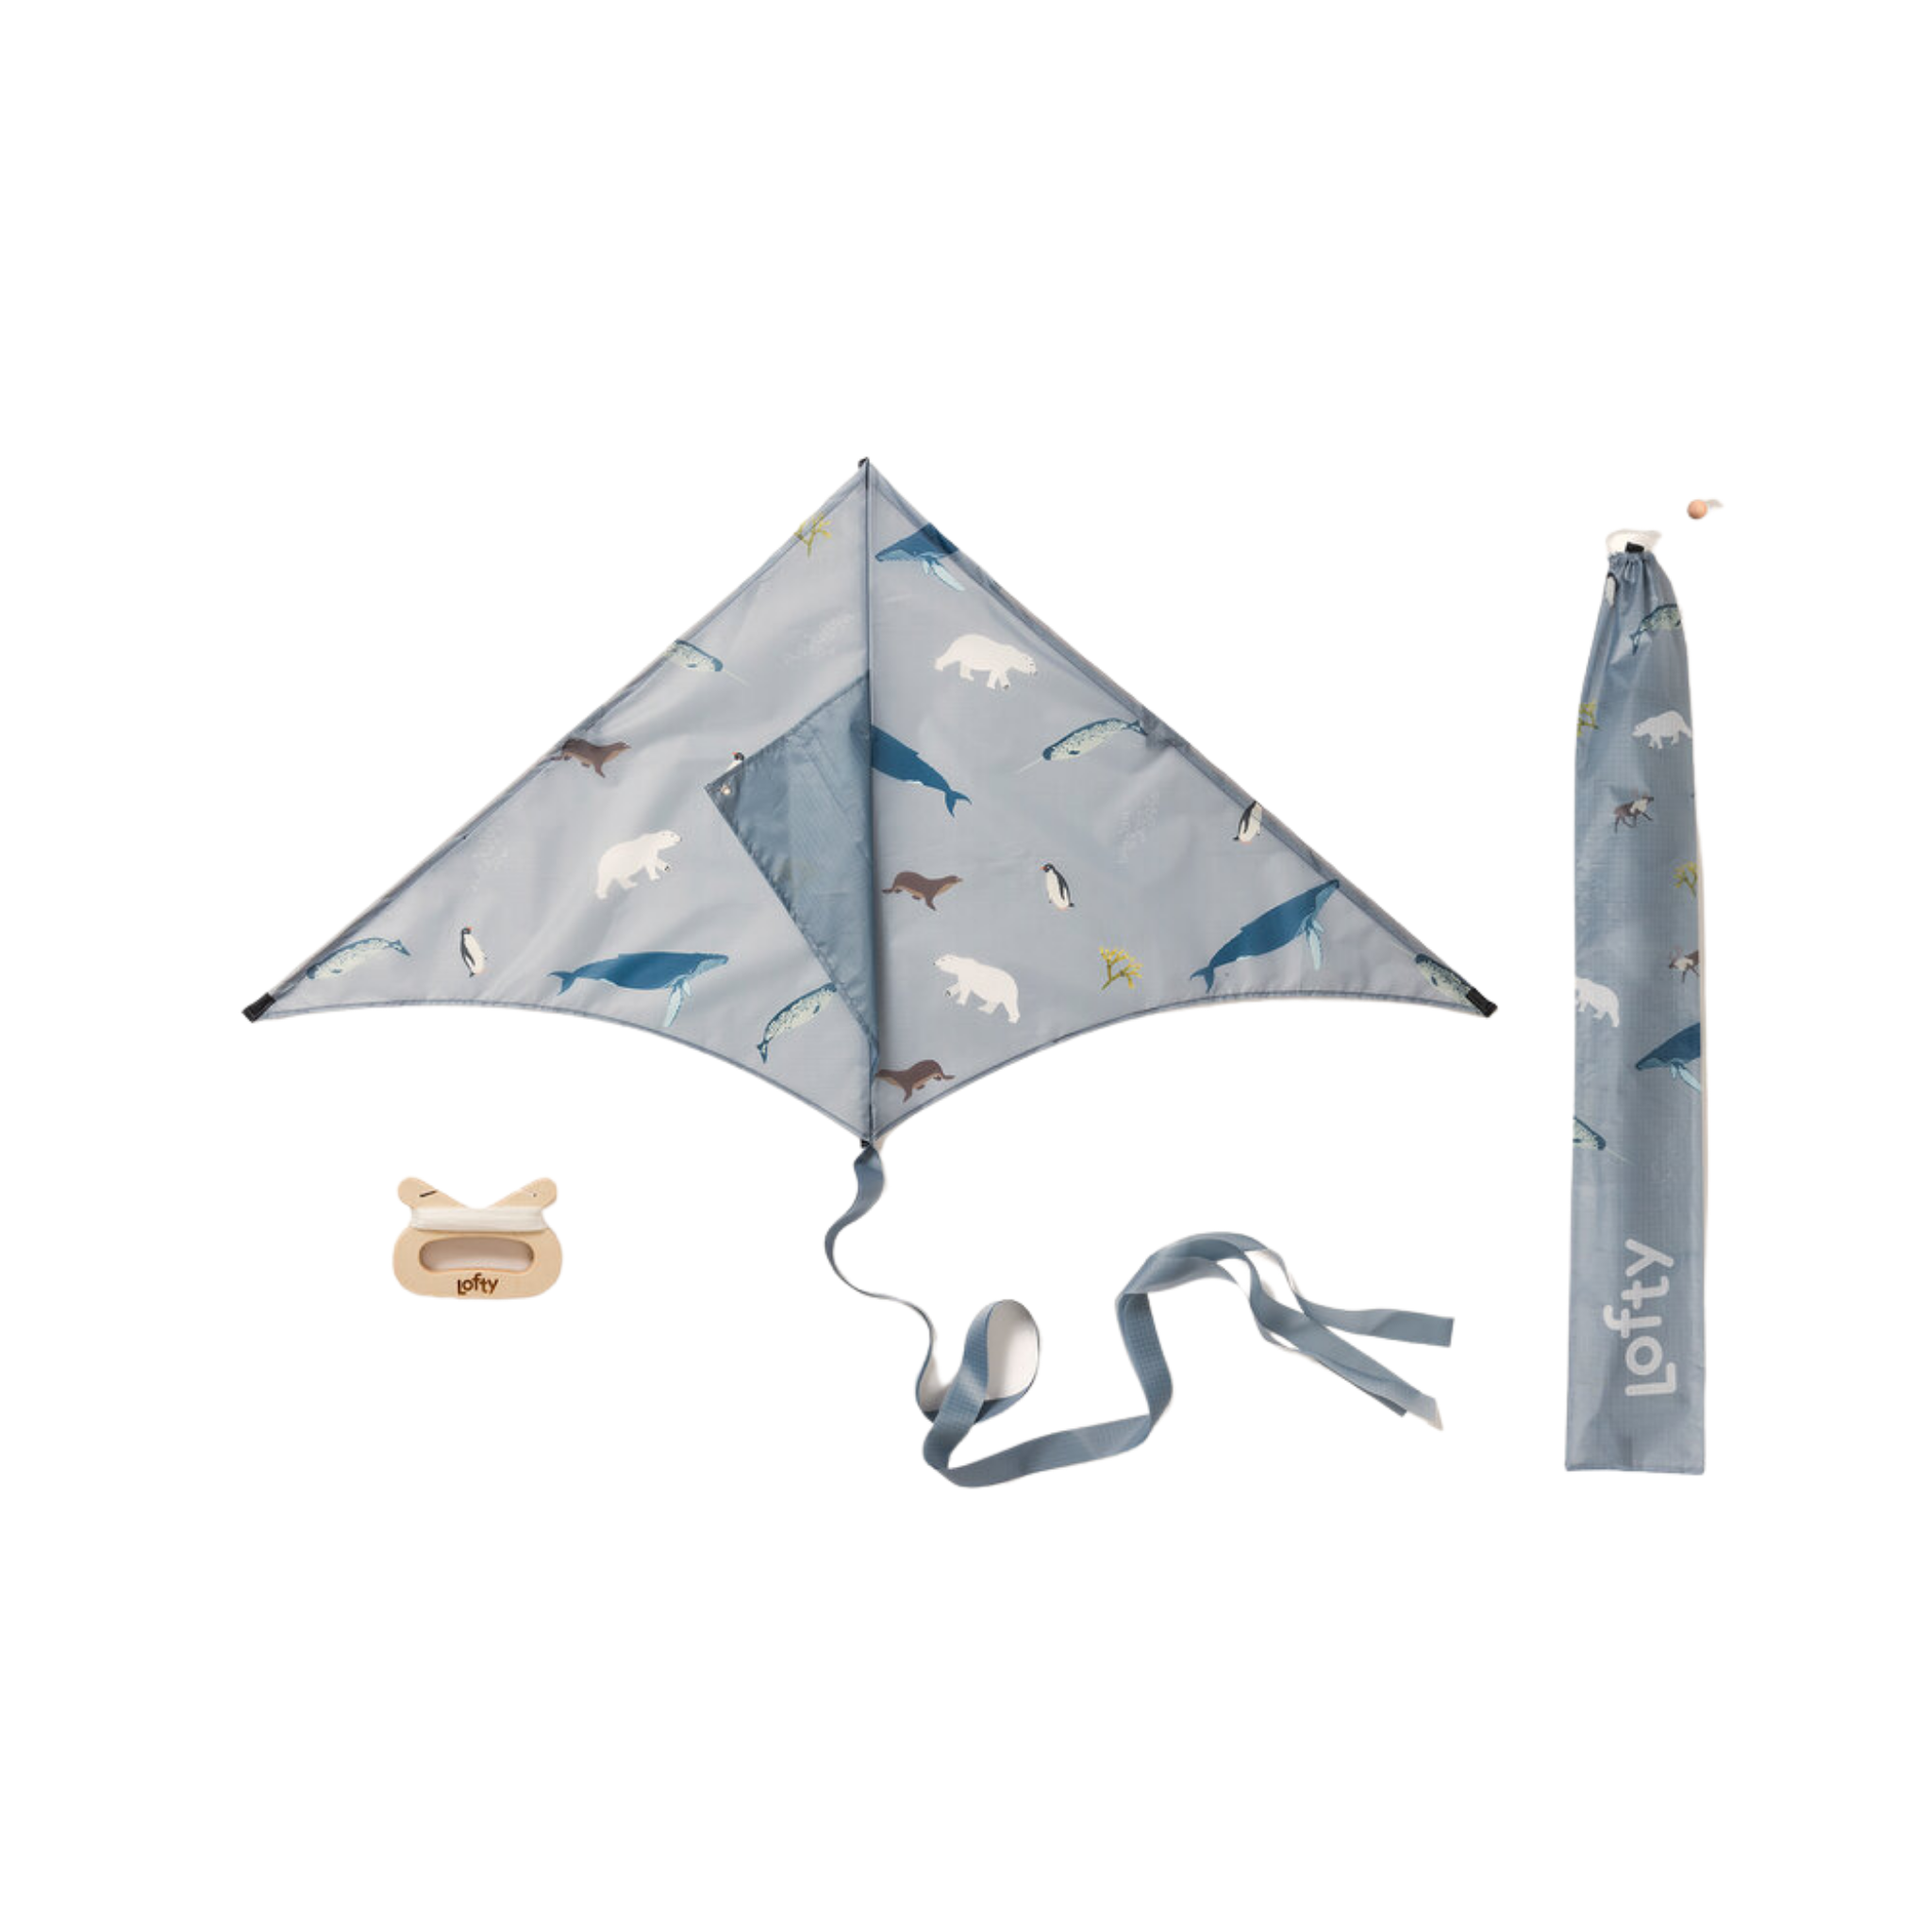 Arctic Kite for Kids by Lofty